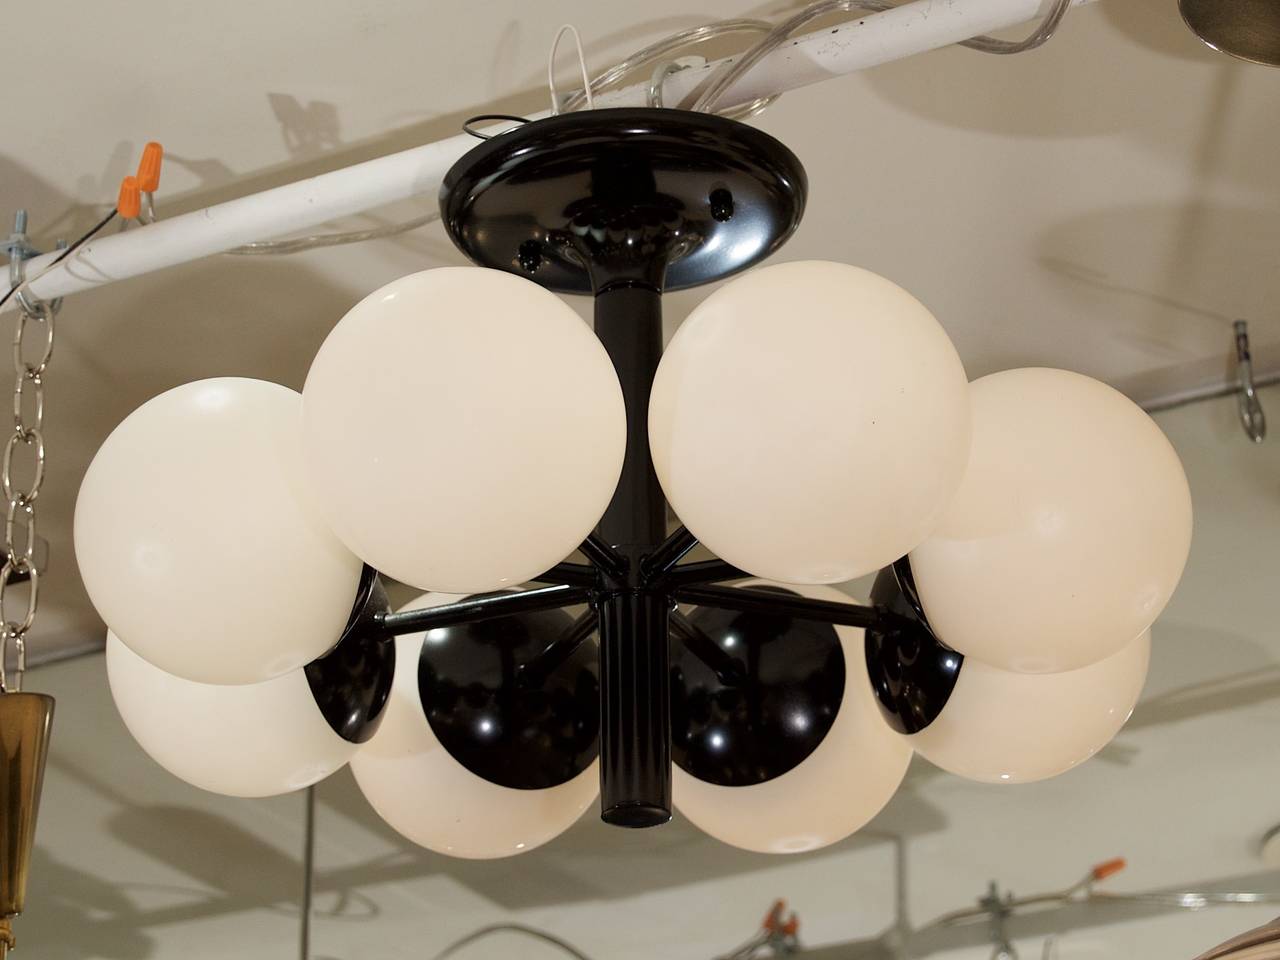 Dramatic radial eight-arm Kaiser chandelier in gloss black with elegant opal glass. 

Takes eight E-14 base bulbs up to 40 watts per bulb. New wiring. Please note height of chandelier is not easily adjusted.